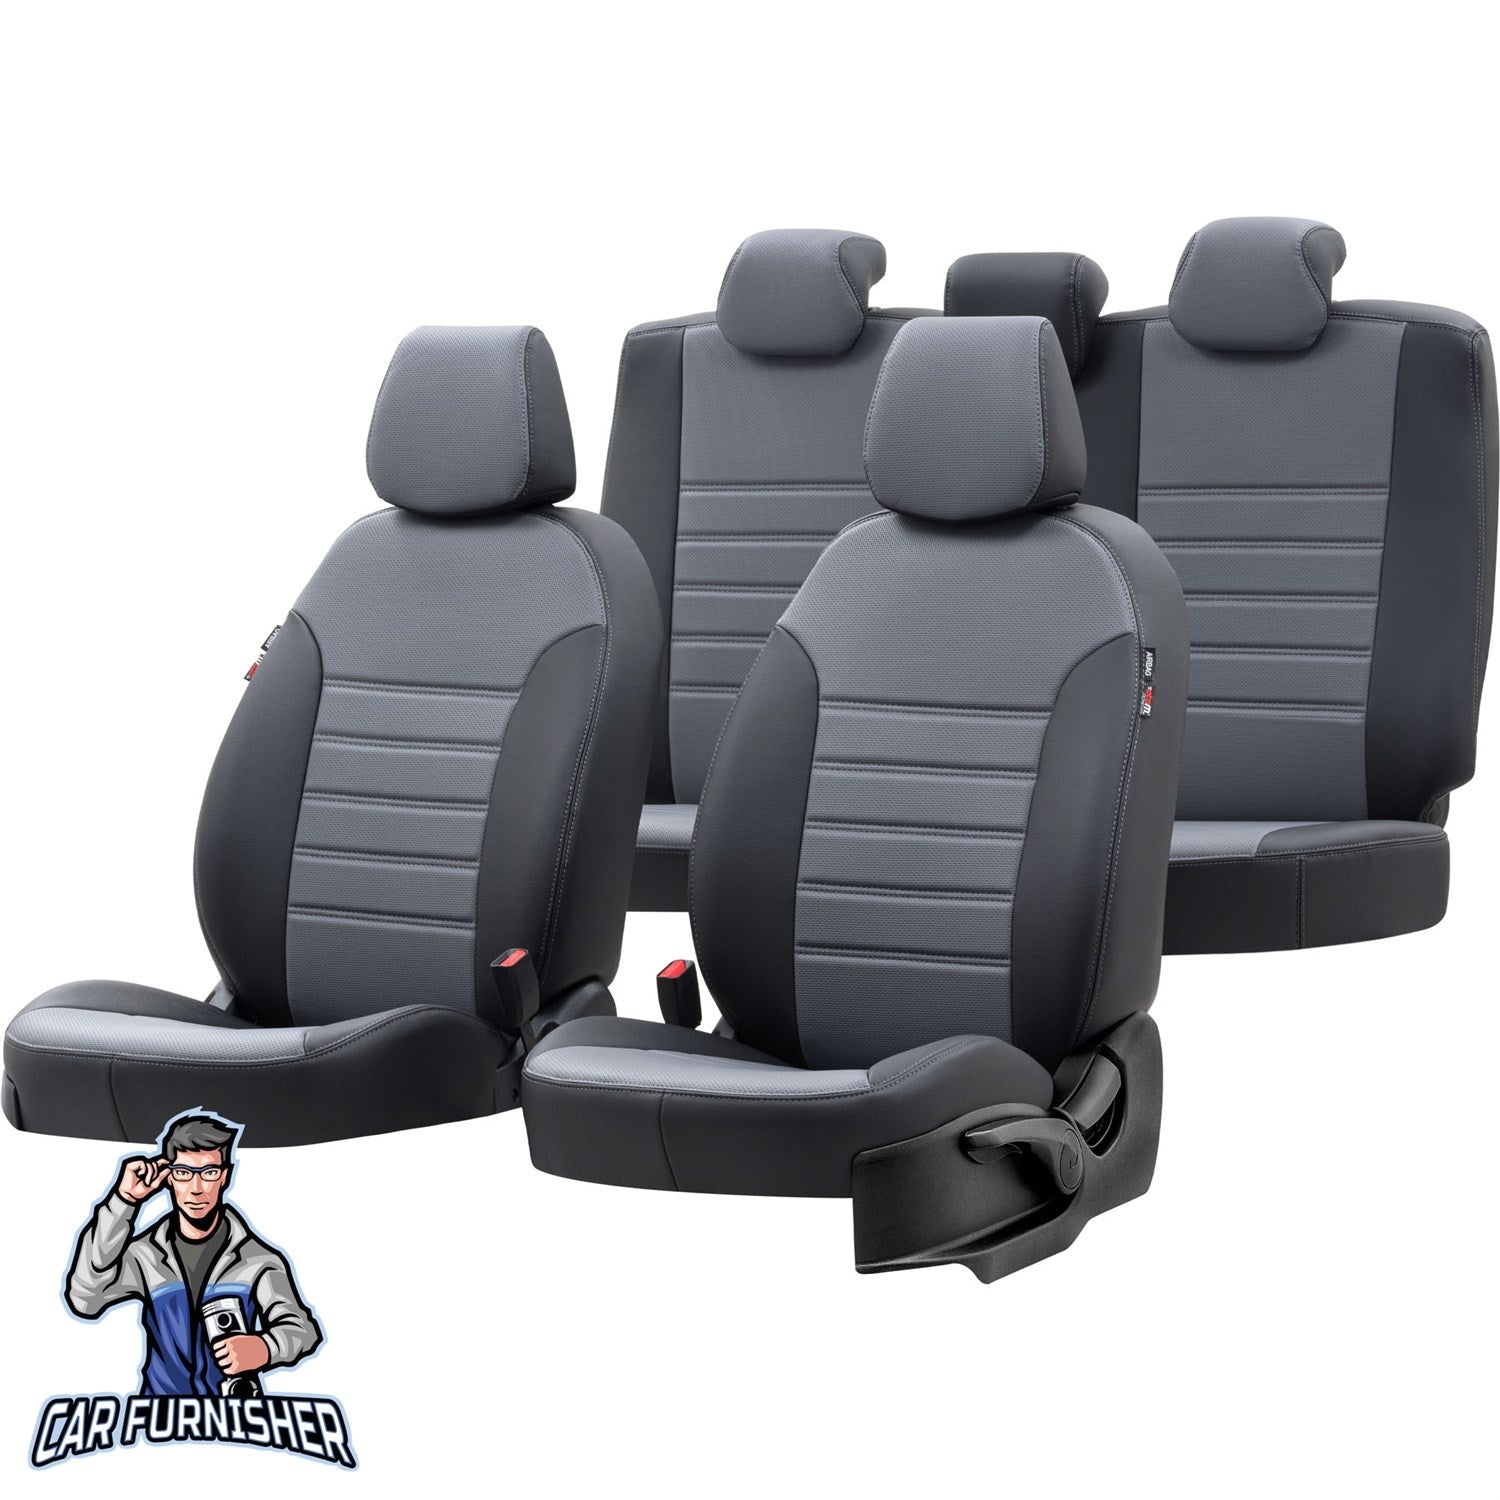 Toyota Corolla Seat Cover New York Leather Design Smoked Black Leather